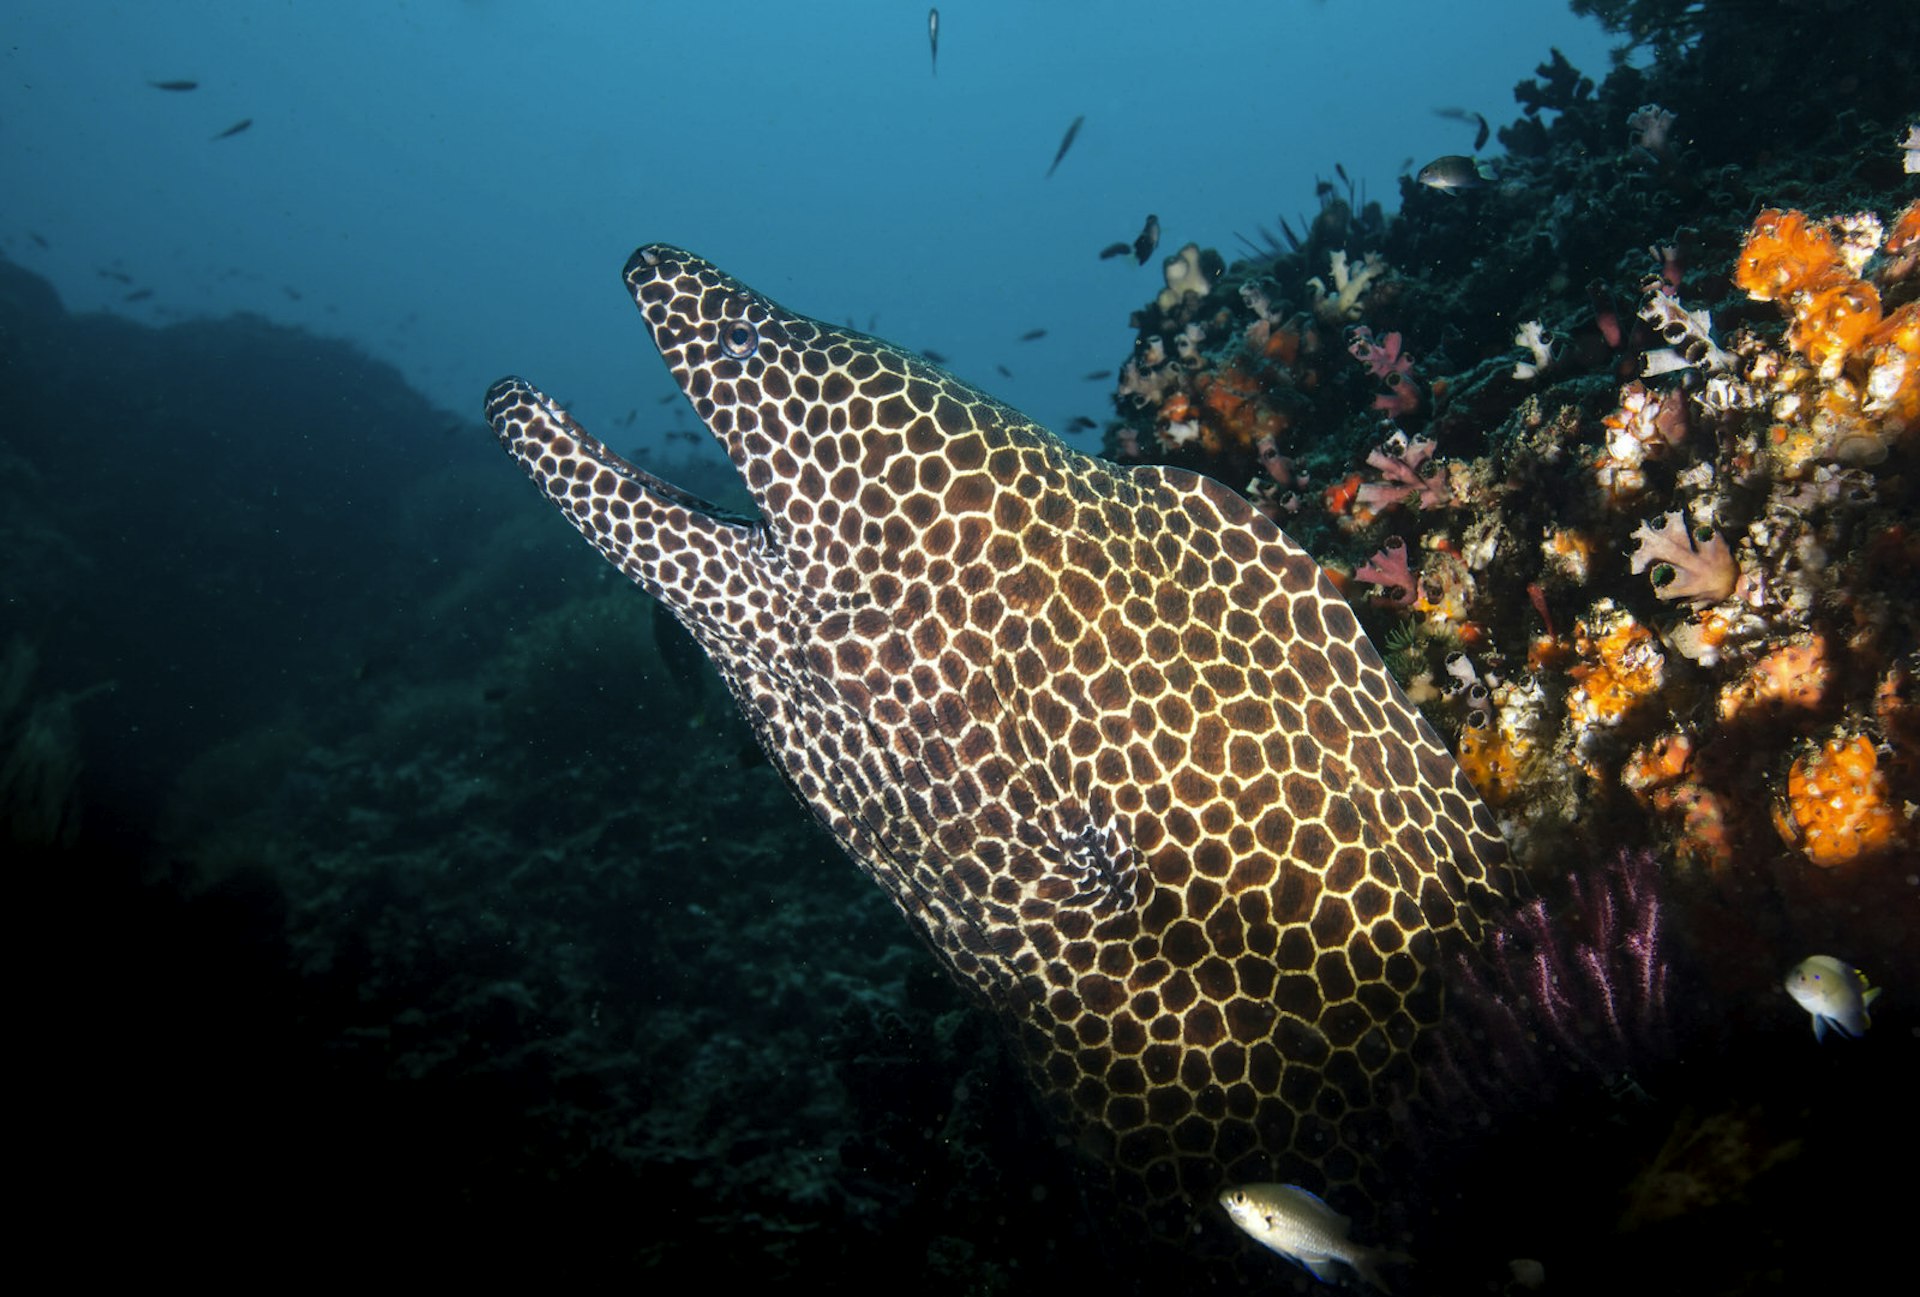 Honeycomb moray eel protruding from colourful coral off the Oman coast